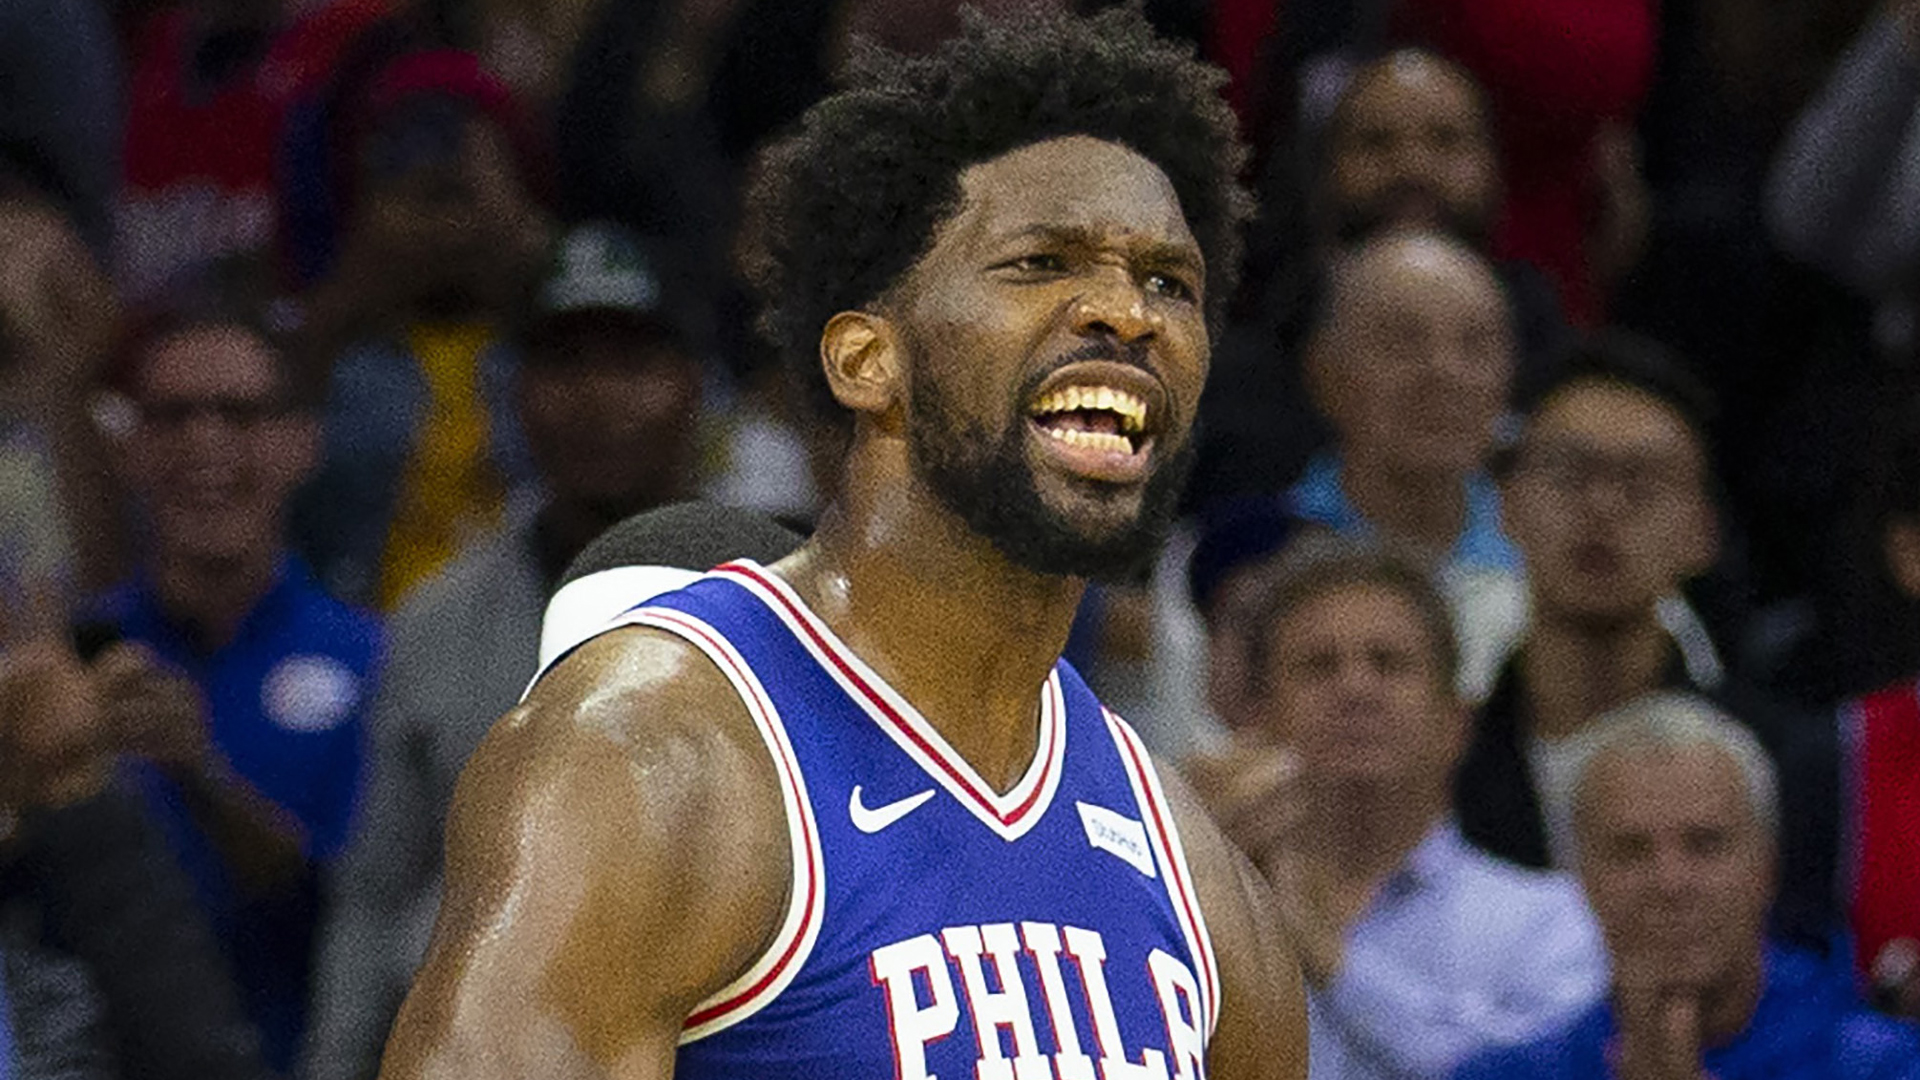 The Philadelphia 76ers improved to 13-0 at home this NBA season by beating the Denver Nuggets.